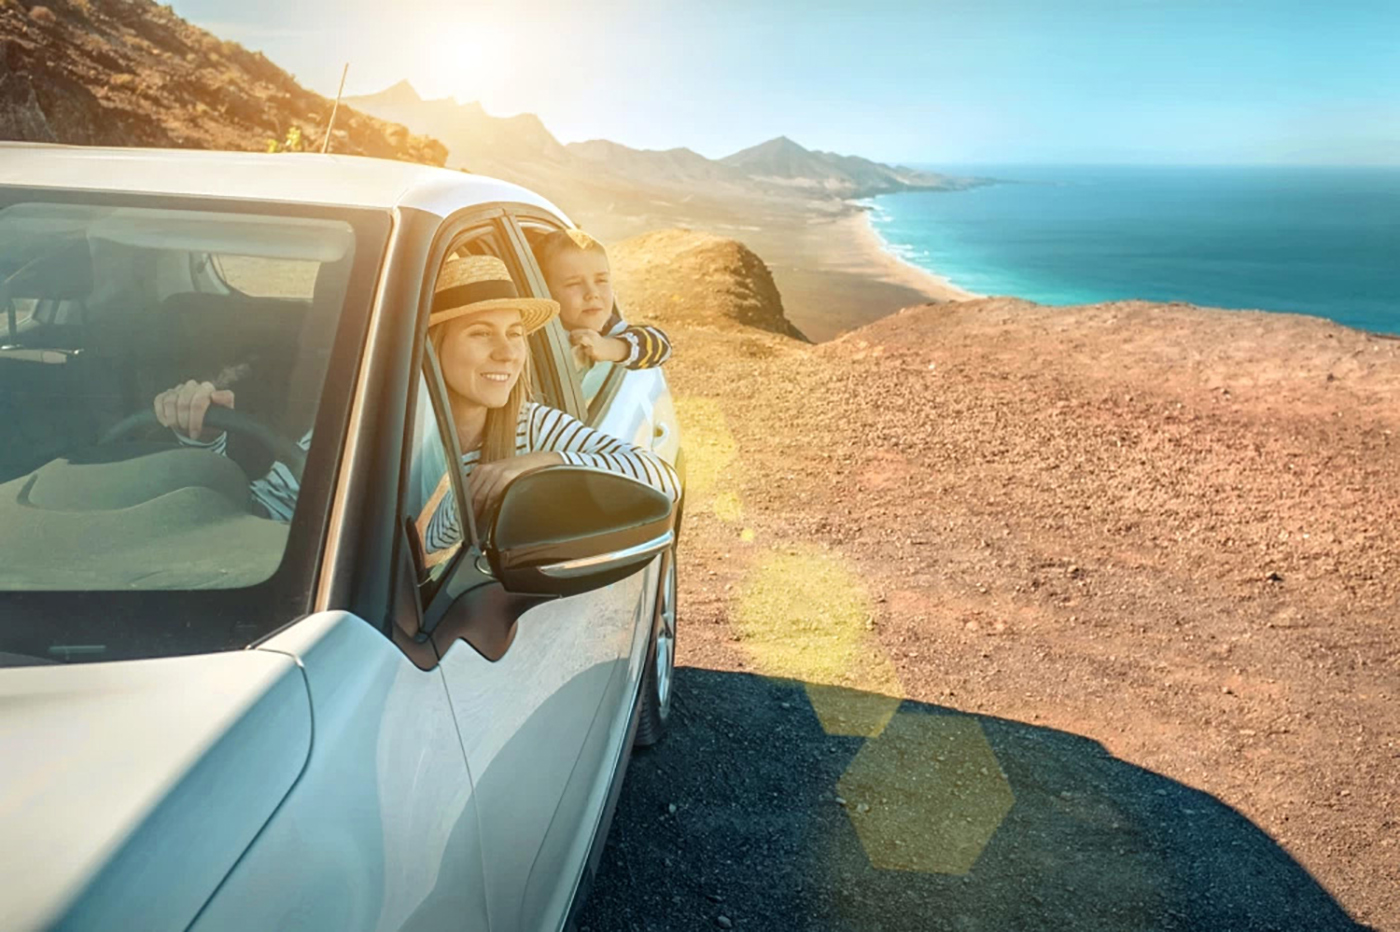 A woman wearing a straw hat and a striped shirt and a young girl wearing a striped shirt looking out the driver's side window of a white car parked in a landscape with hills and a body of water in the background.